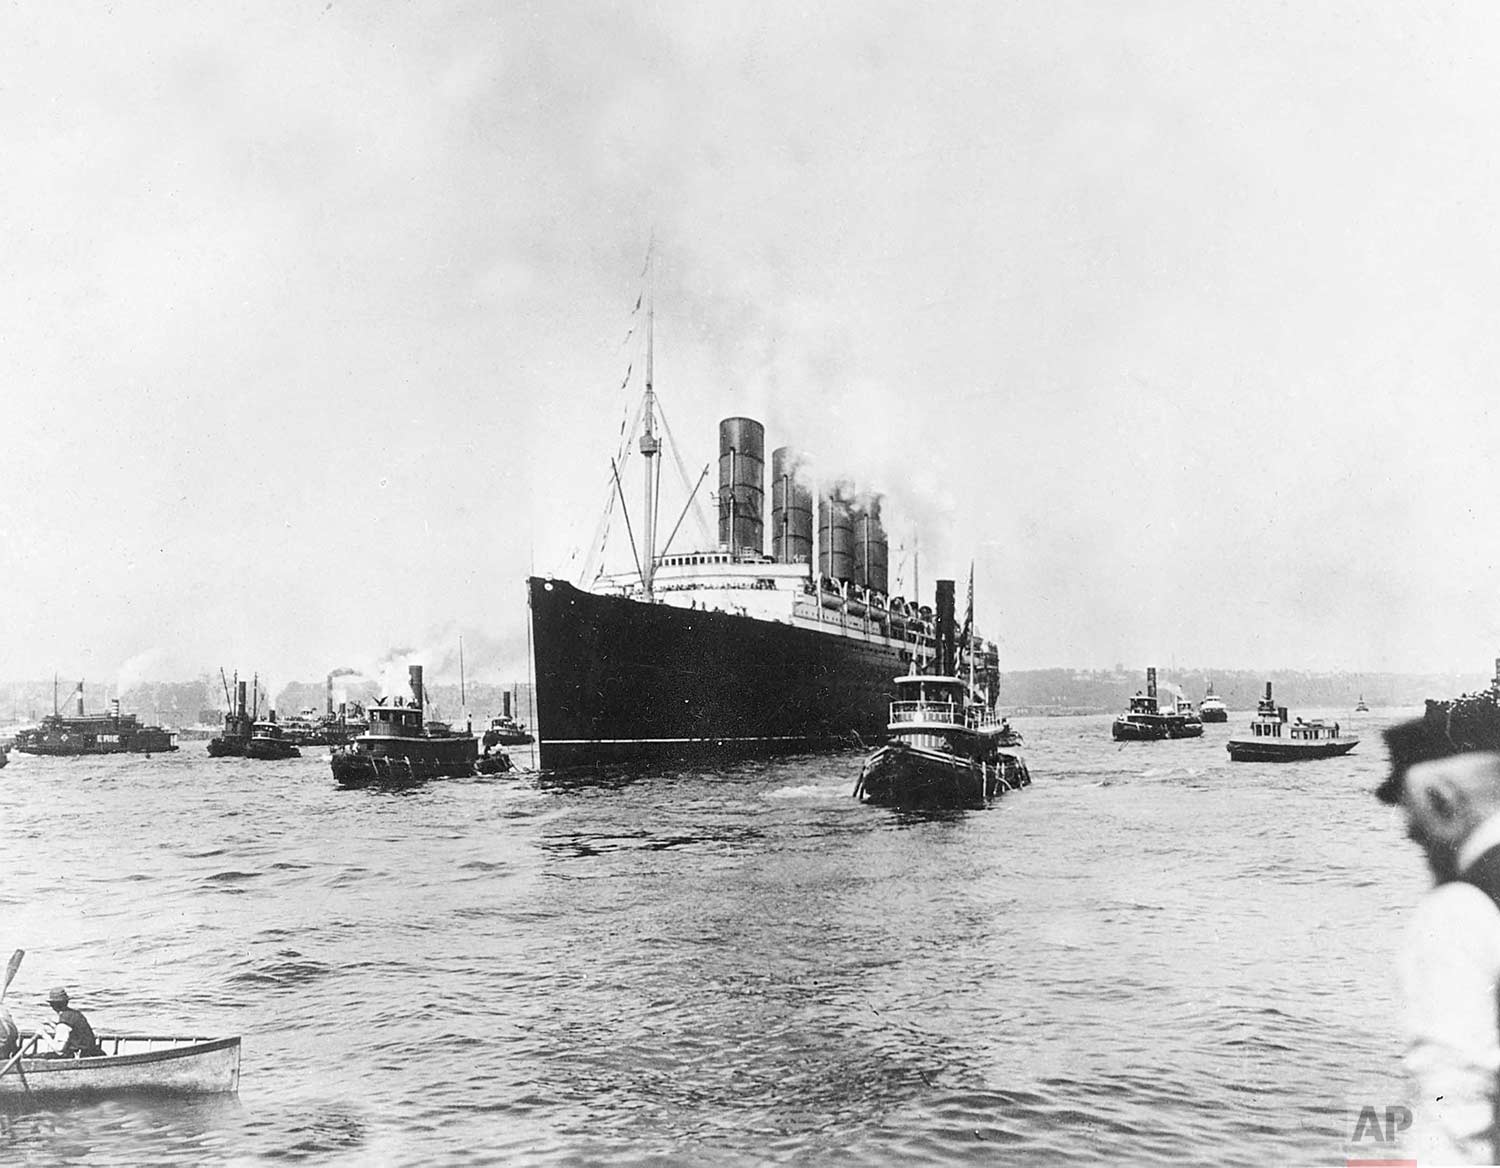  In this May 1, 1915  photo, the British cargo and passenger ship Lusitania as it sets out for England on its last voyage from New York City. The British ocean liner was sunk off Ireland on May 7, 1915 by a German U-Boat, killing 1,150 people, 114 of